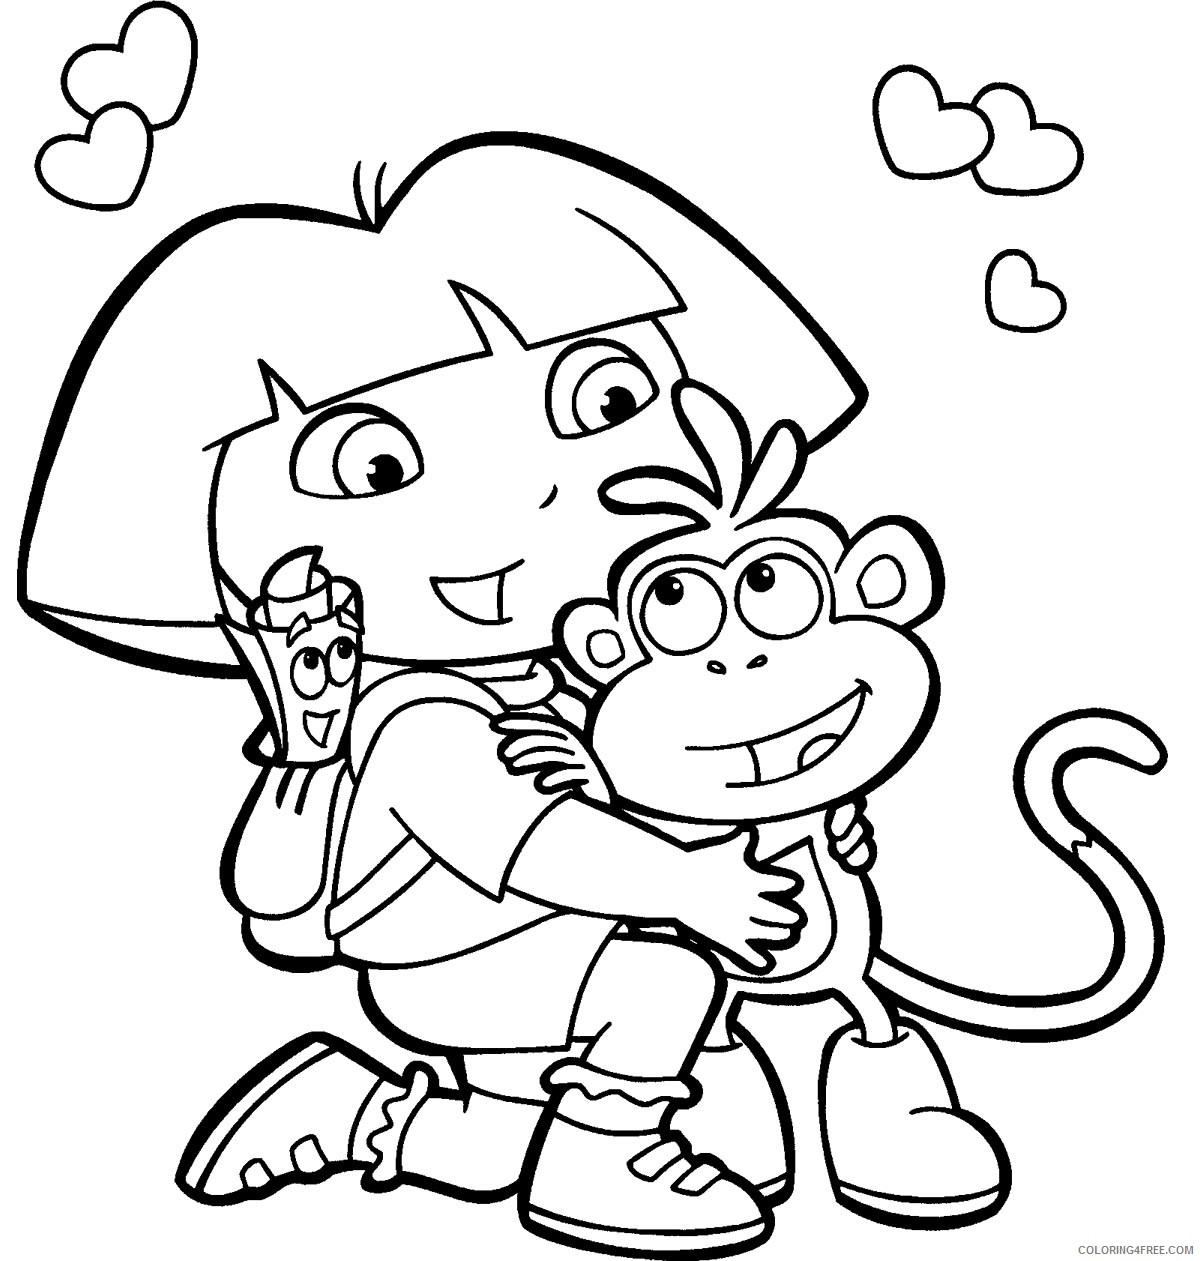 dora coloring pages dora and friends Coloring4free